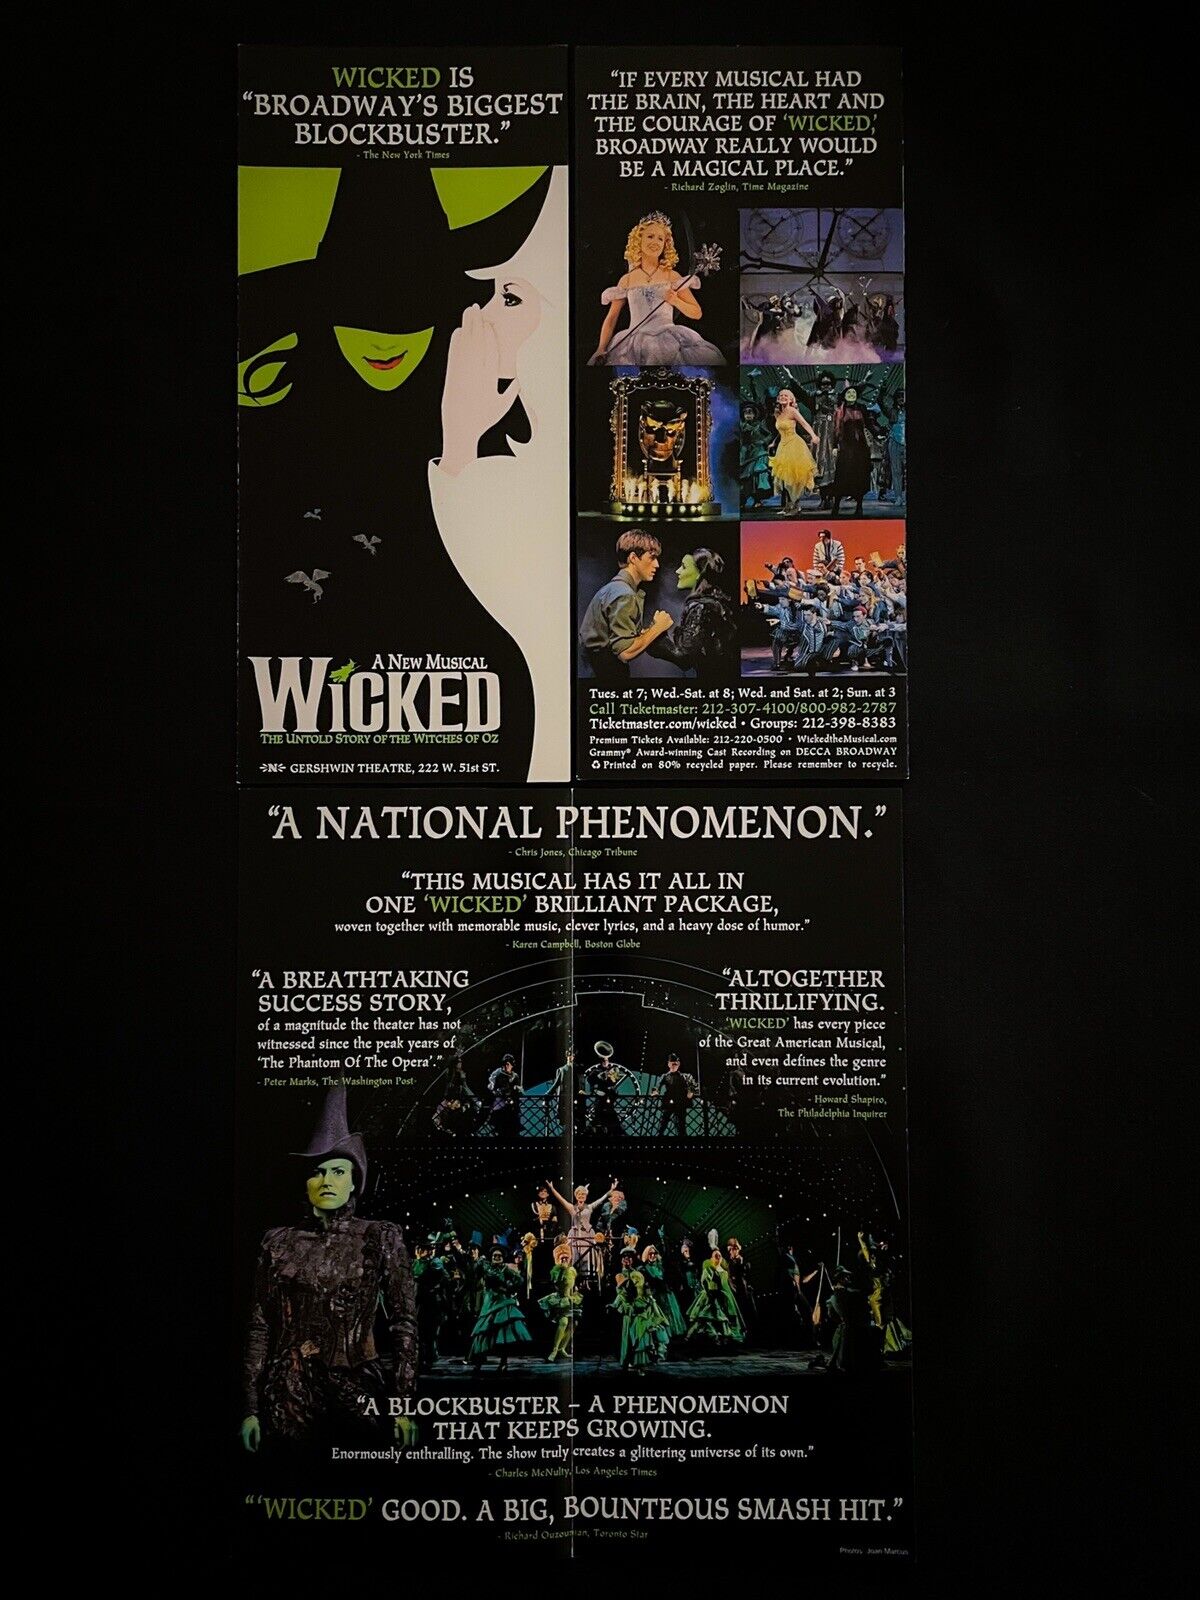 WICKED The Musical Broadway Flyer. Nicole Parker, Alli Mauzey, 2009 Leaflet